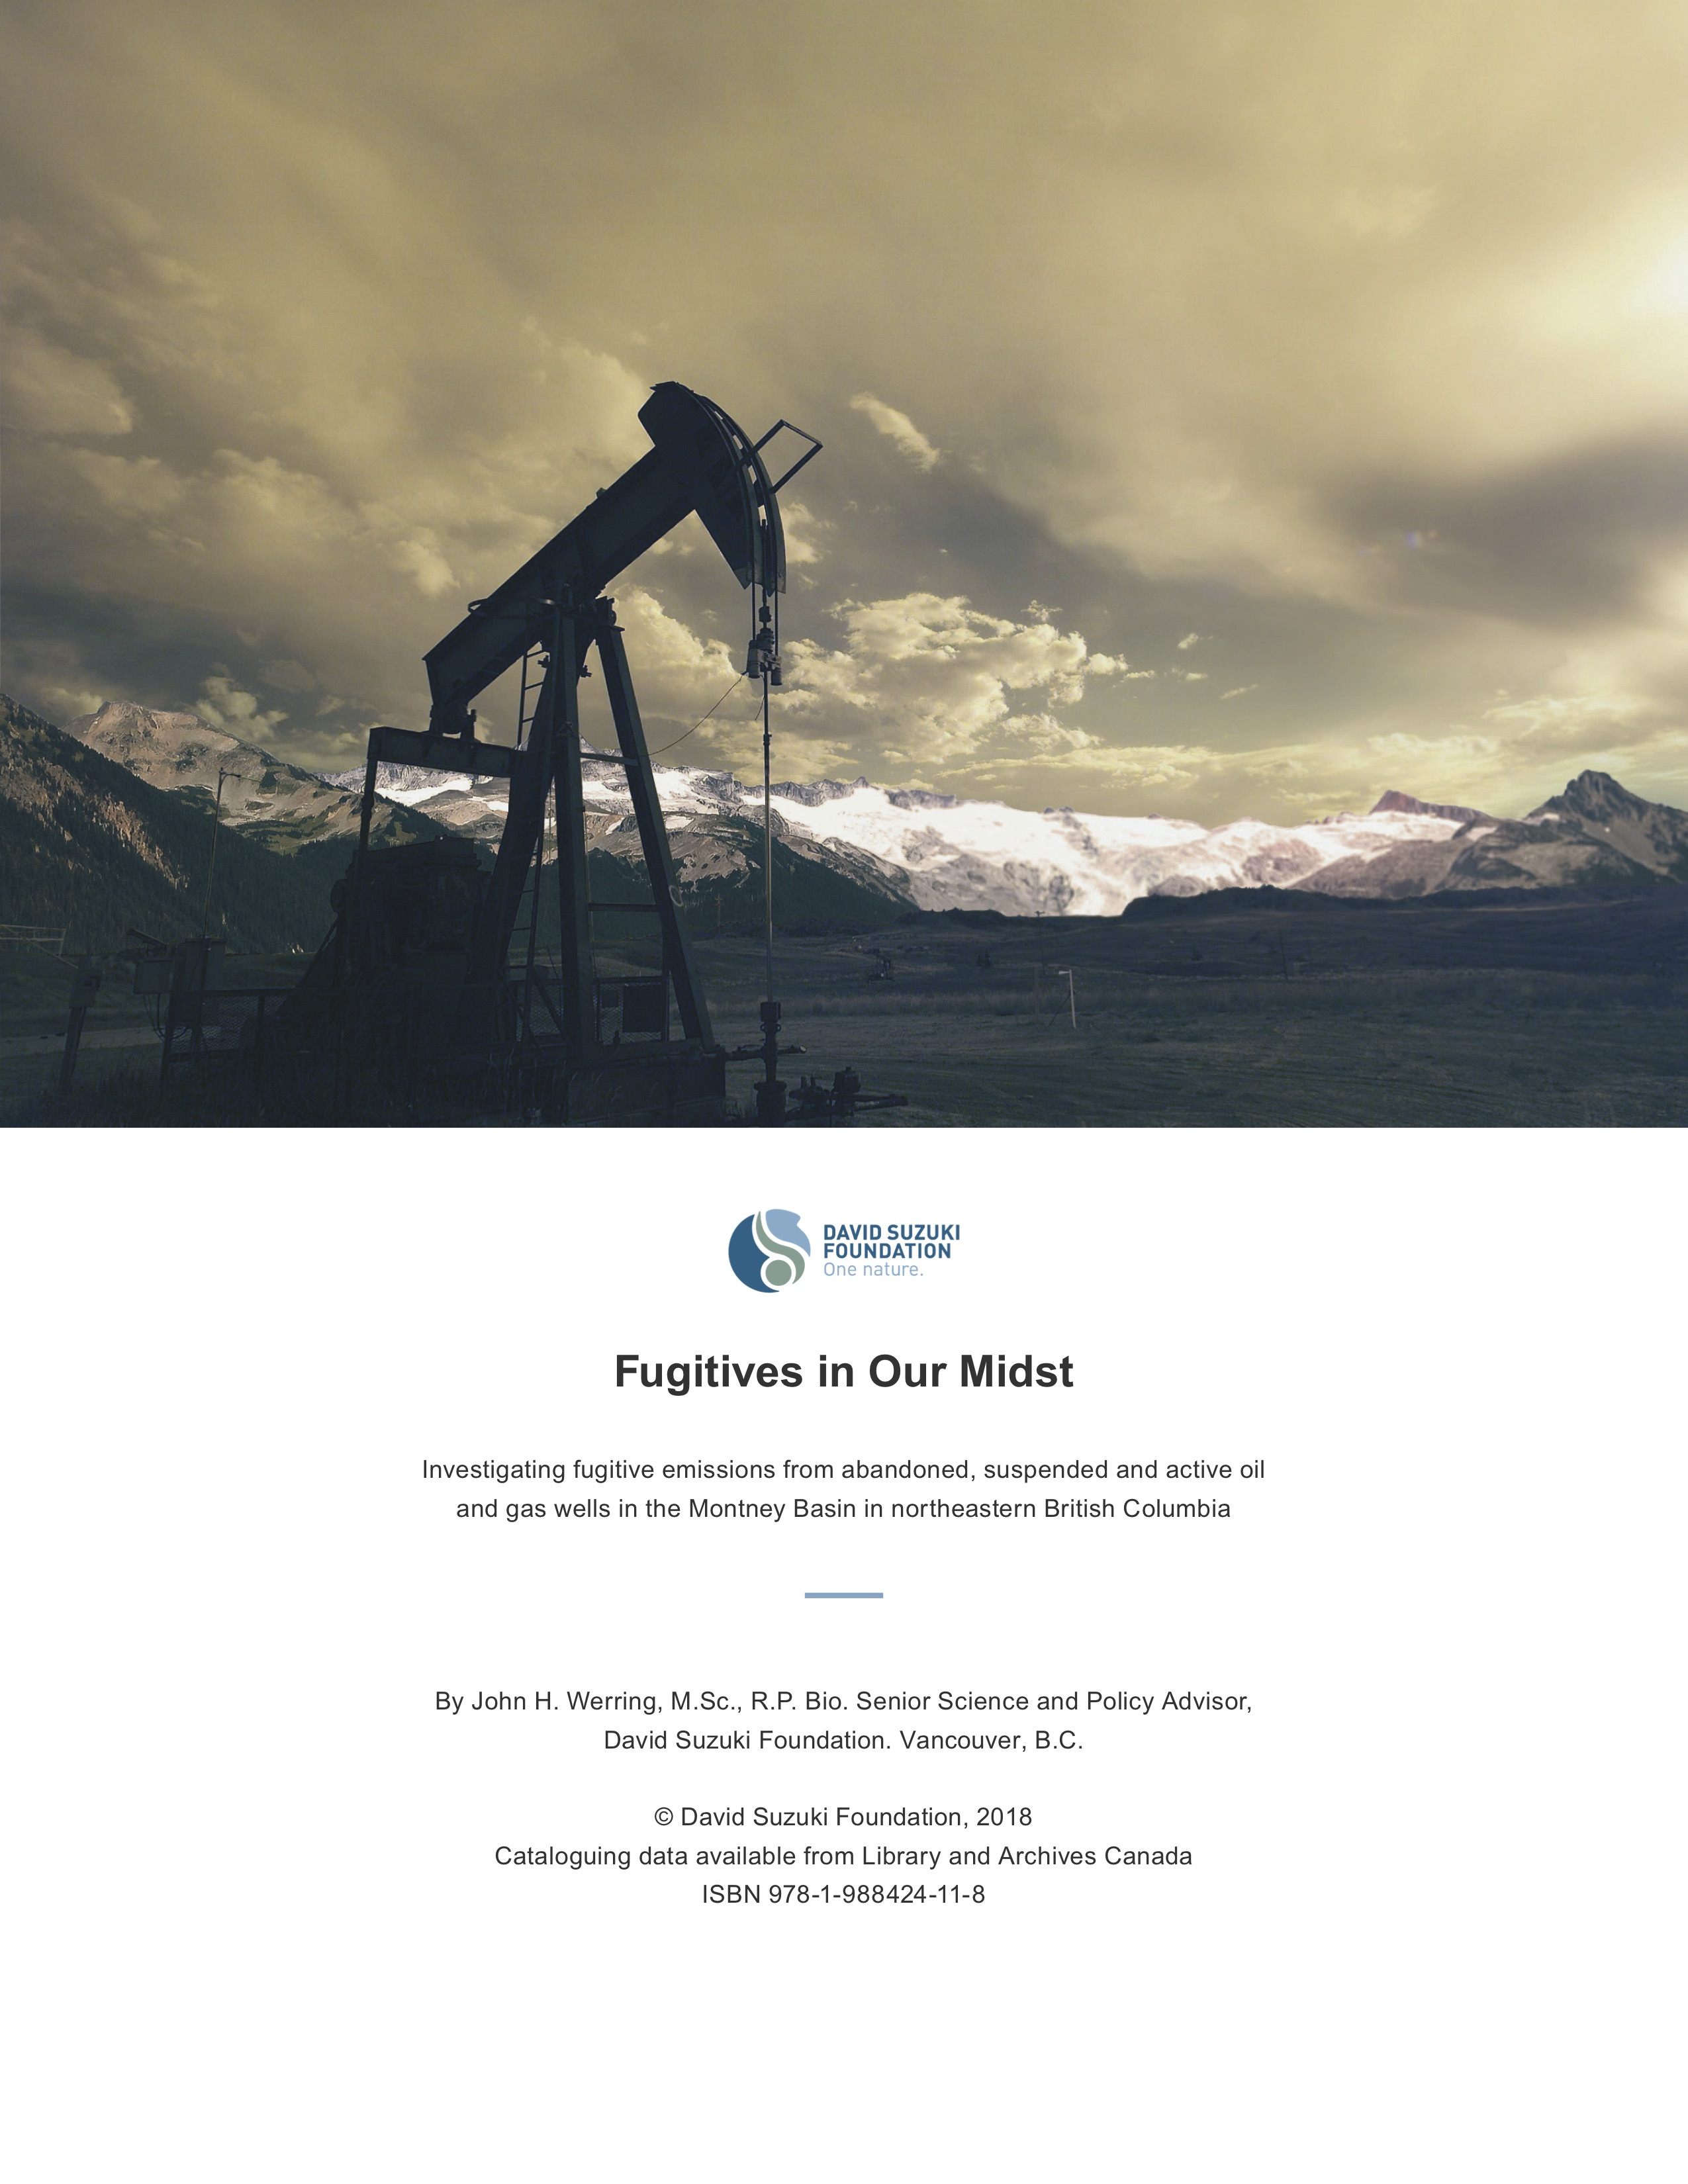 Fugitives in Our Midst: Investigating Fugitive Emissions from Abandoned, Suspended and Active Oil and Gas Wells in the Montney Basin in Northeastern British Columbia cover